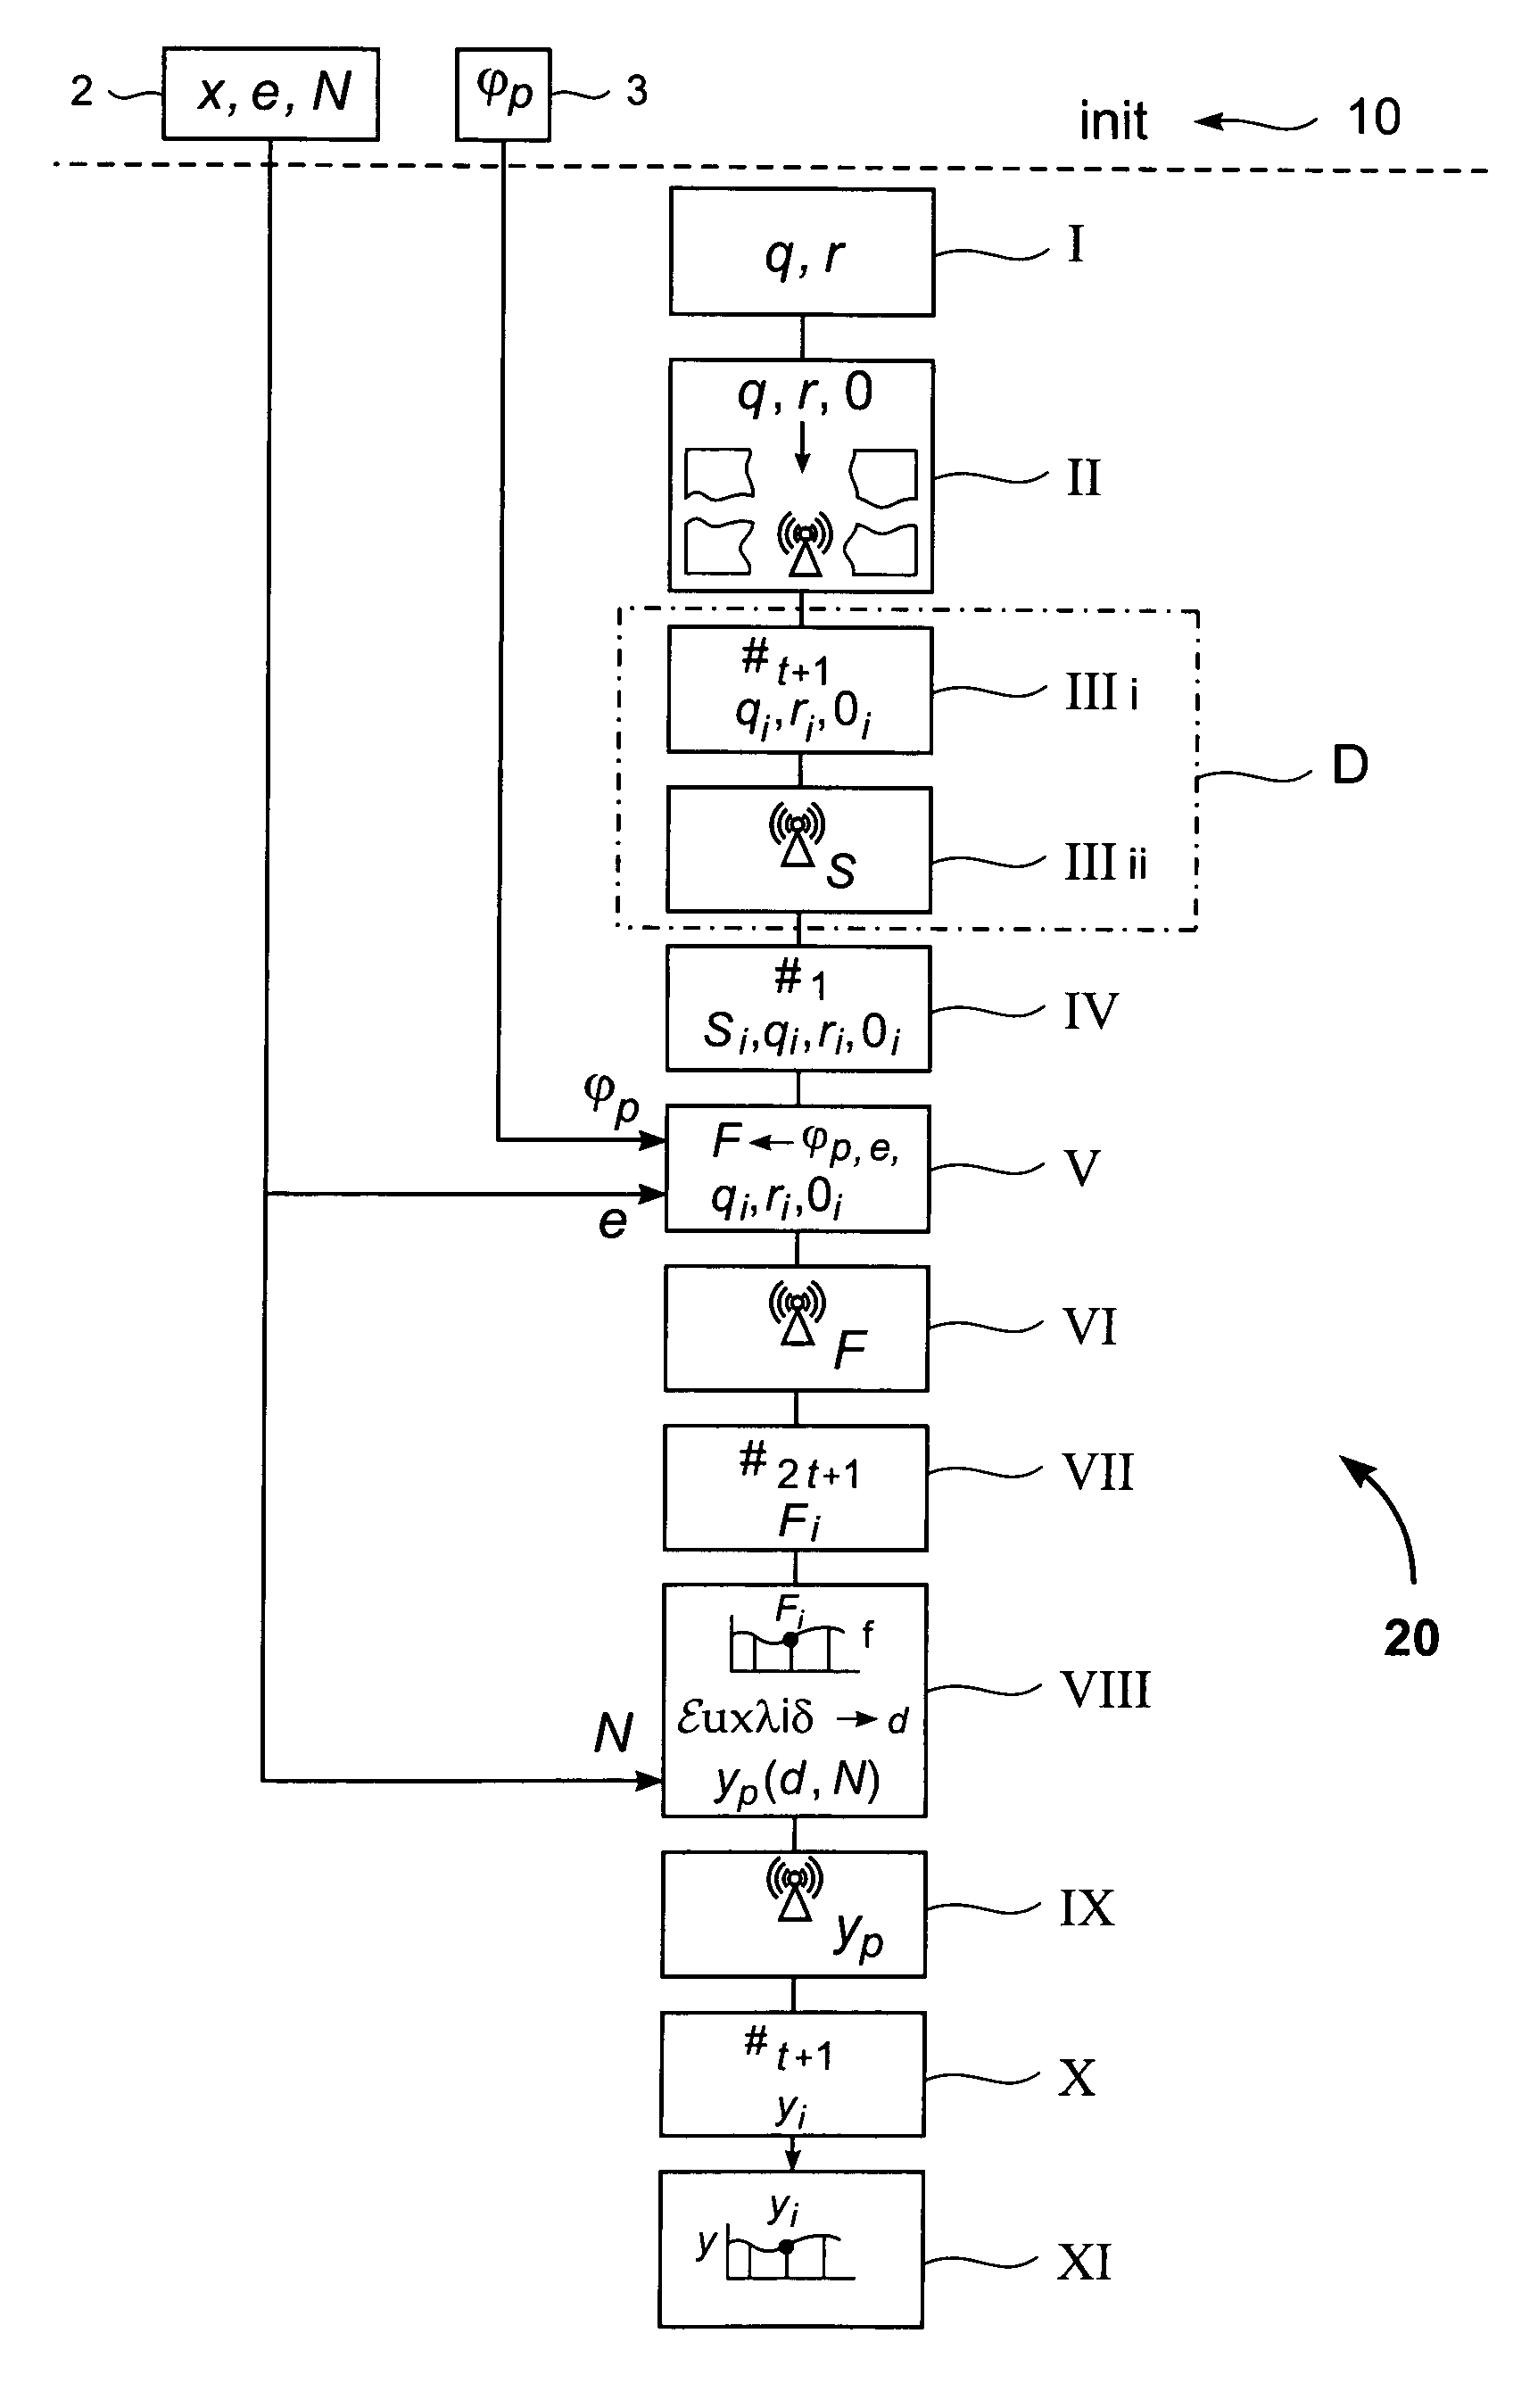 Method for distributed computation of RSA inverses in asynchronous networks